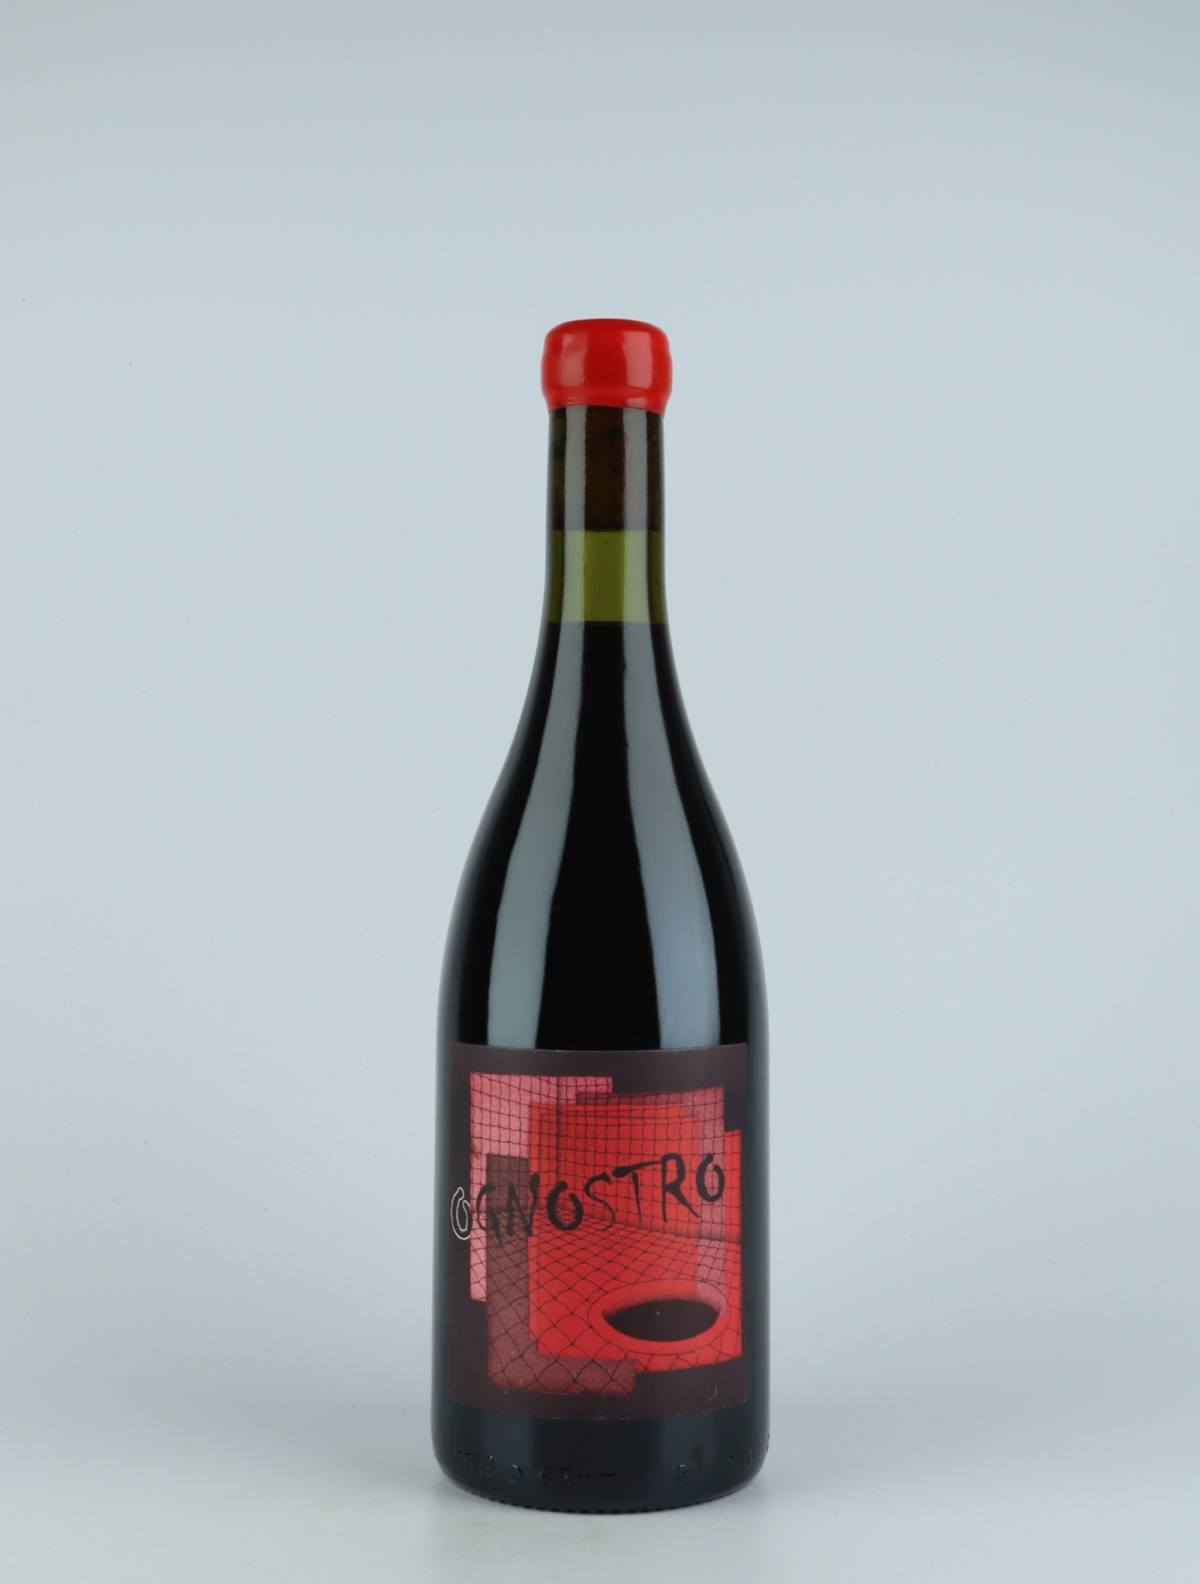 A bottle 2015 Ognostro Rosso Red wine from Marco Tinessa, Campania in Italy